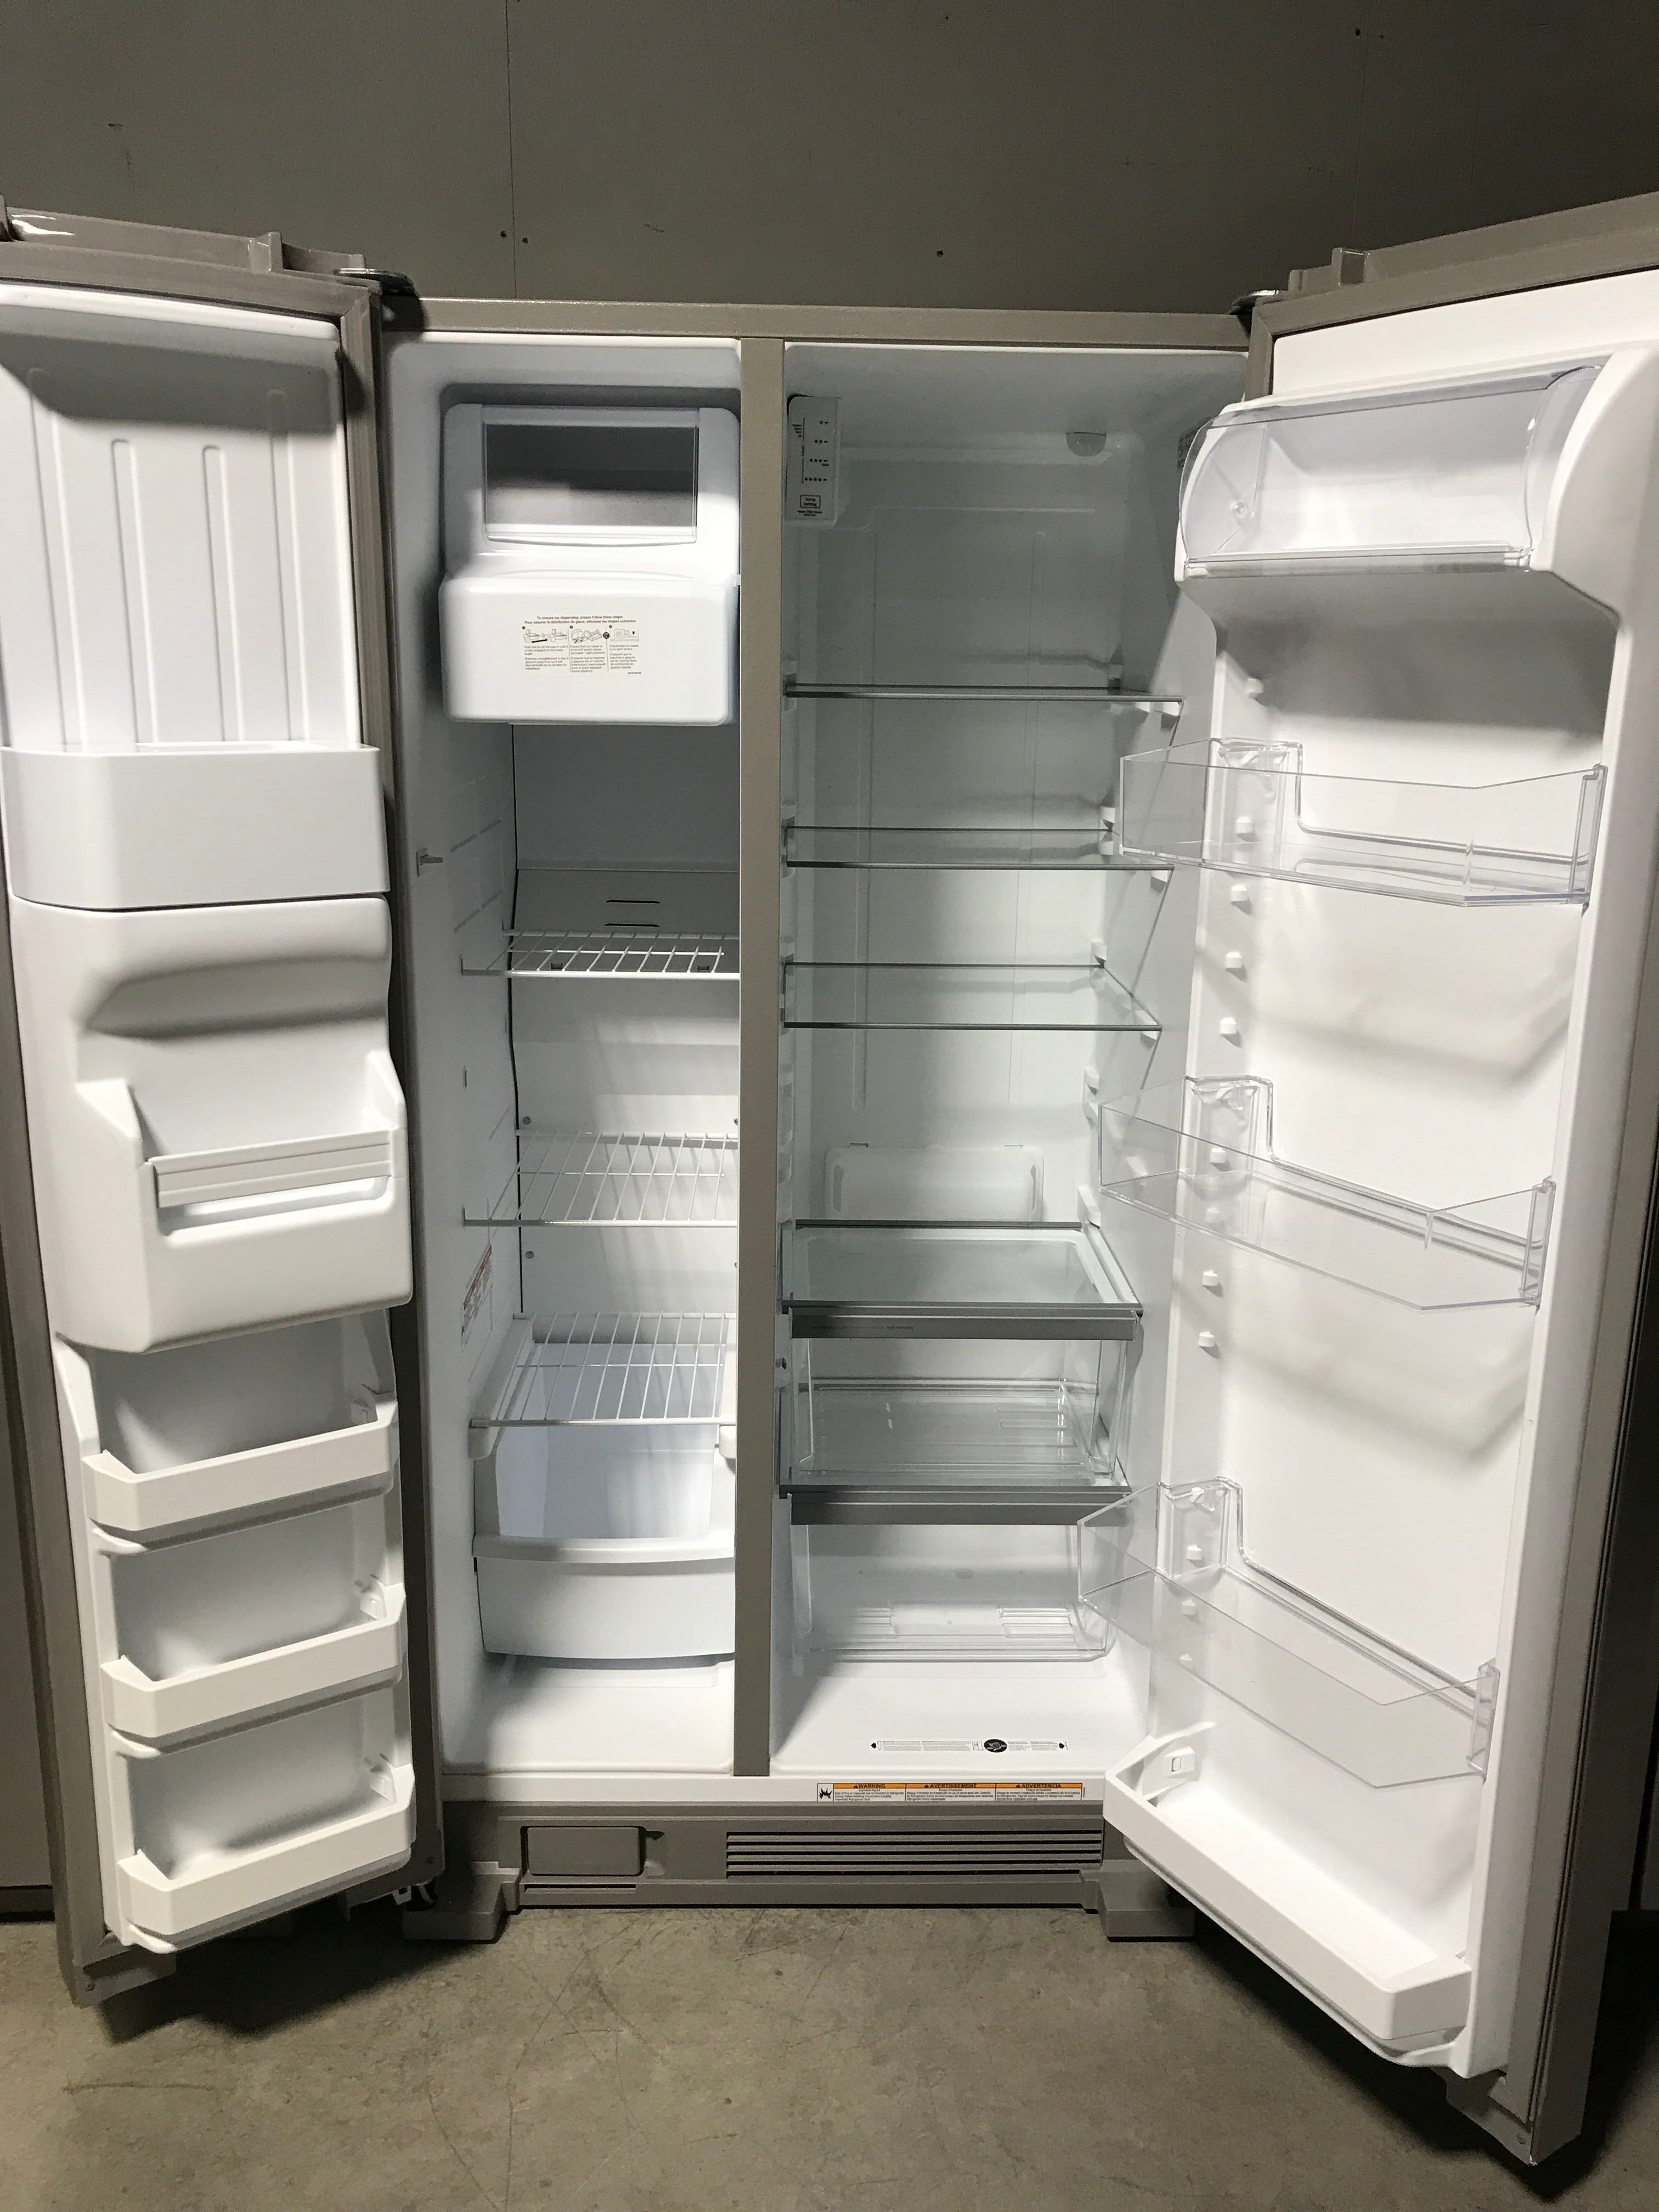 E1322 36"x 32"x 70" Stainless Whirlpool Side By Side Refrigerator WRS315SDHM08/HRA5096098